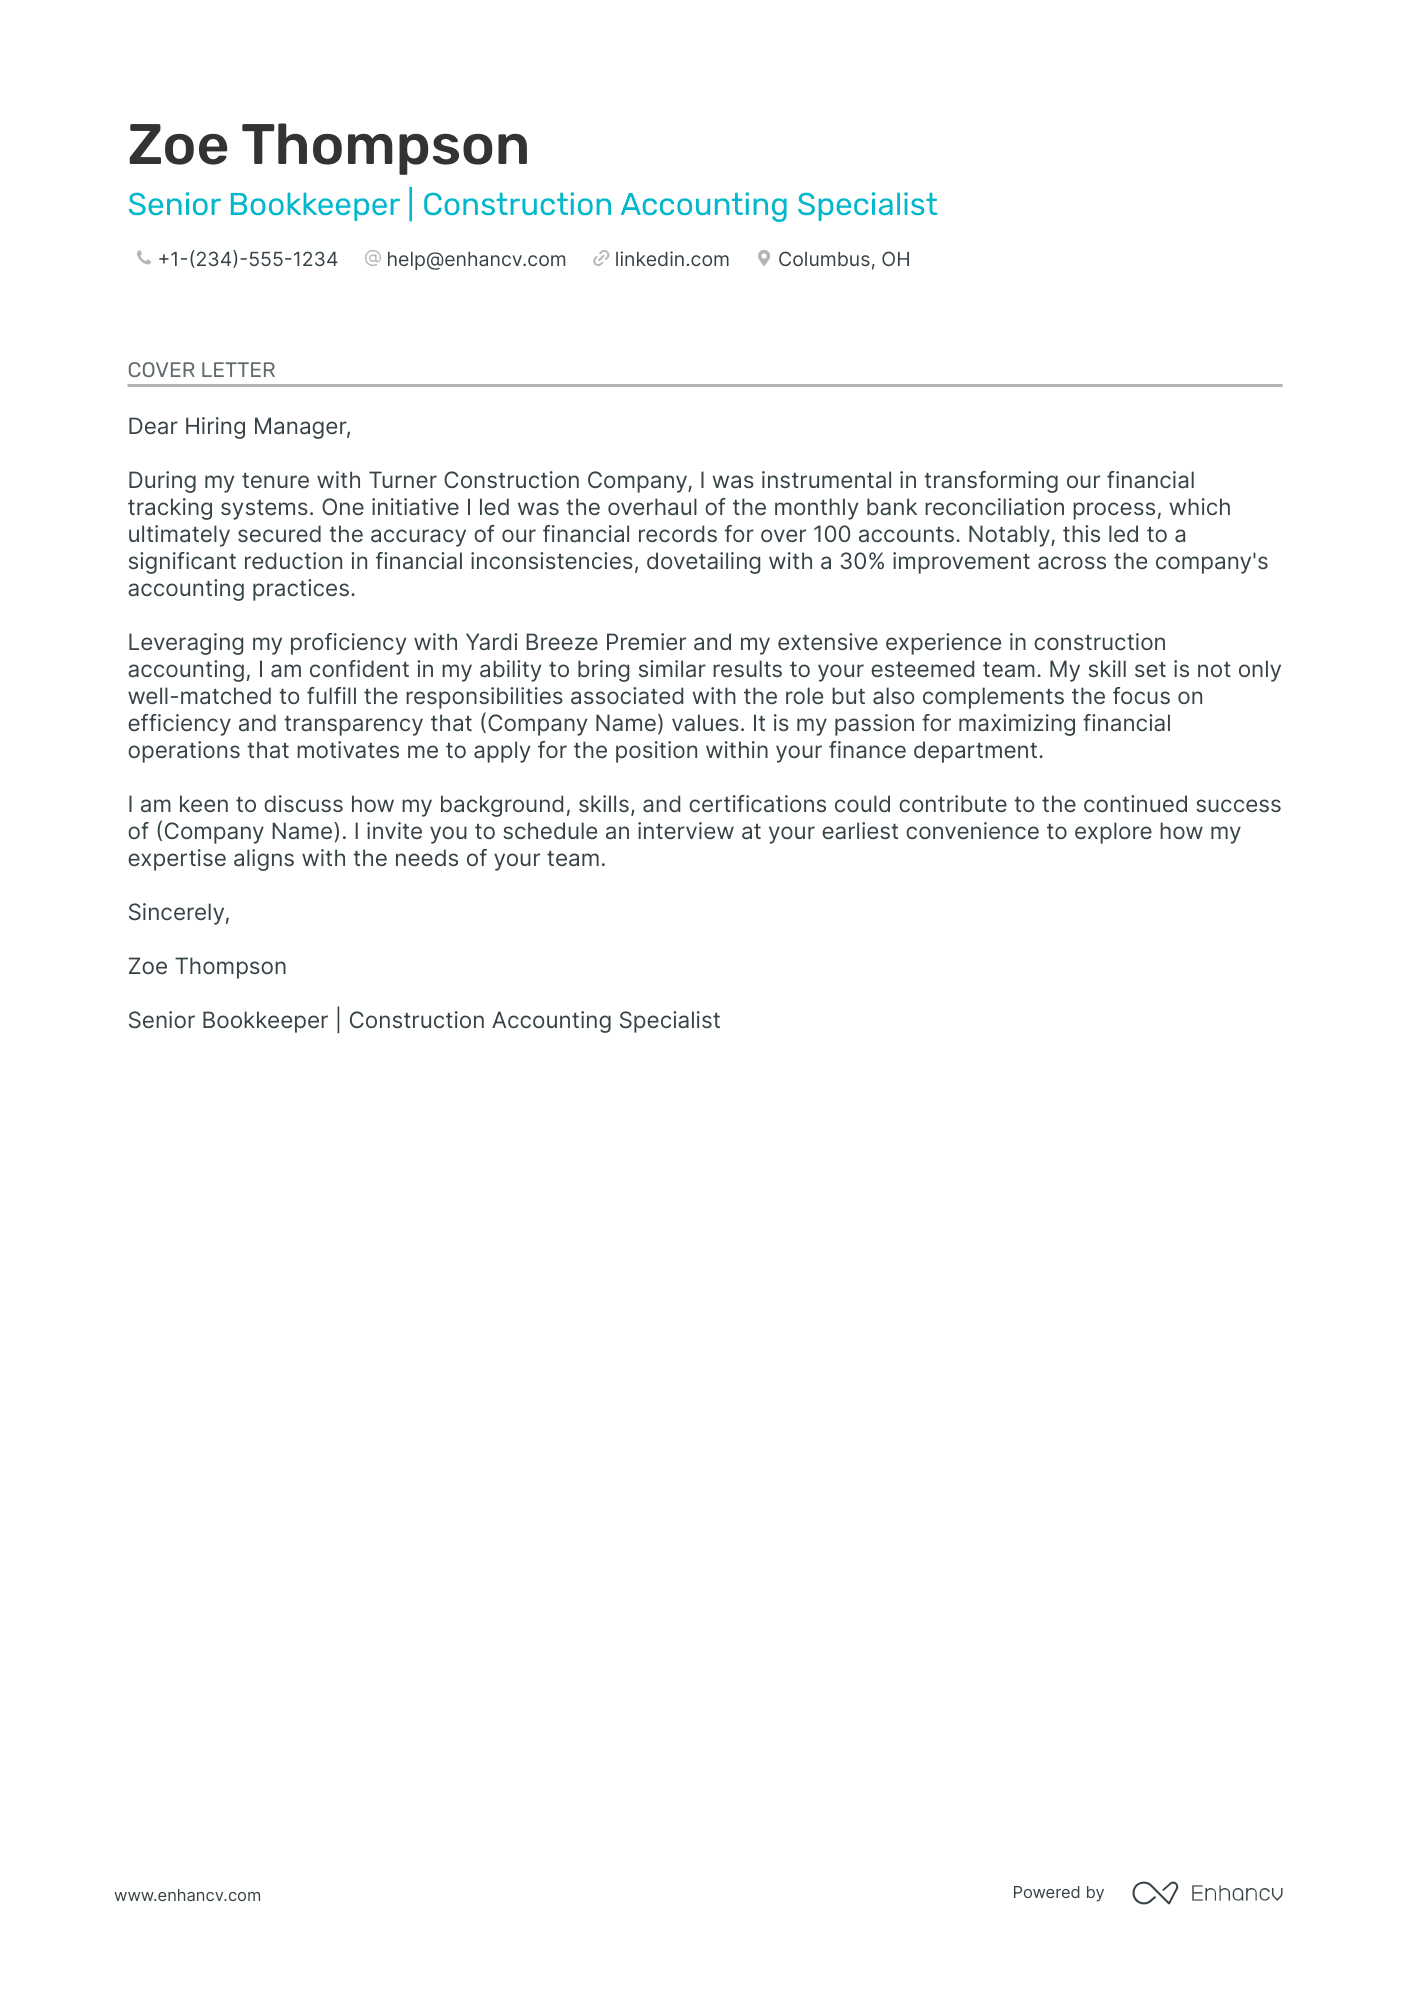 cover letter sample for a bookkeeper